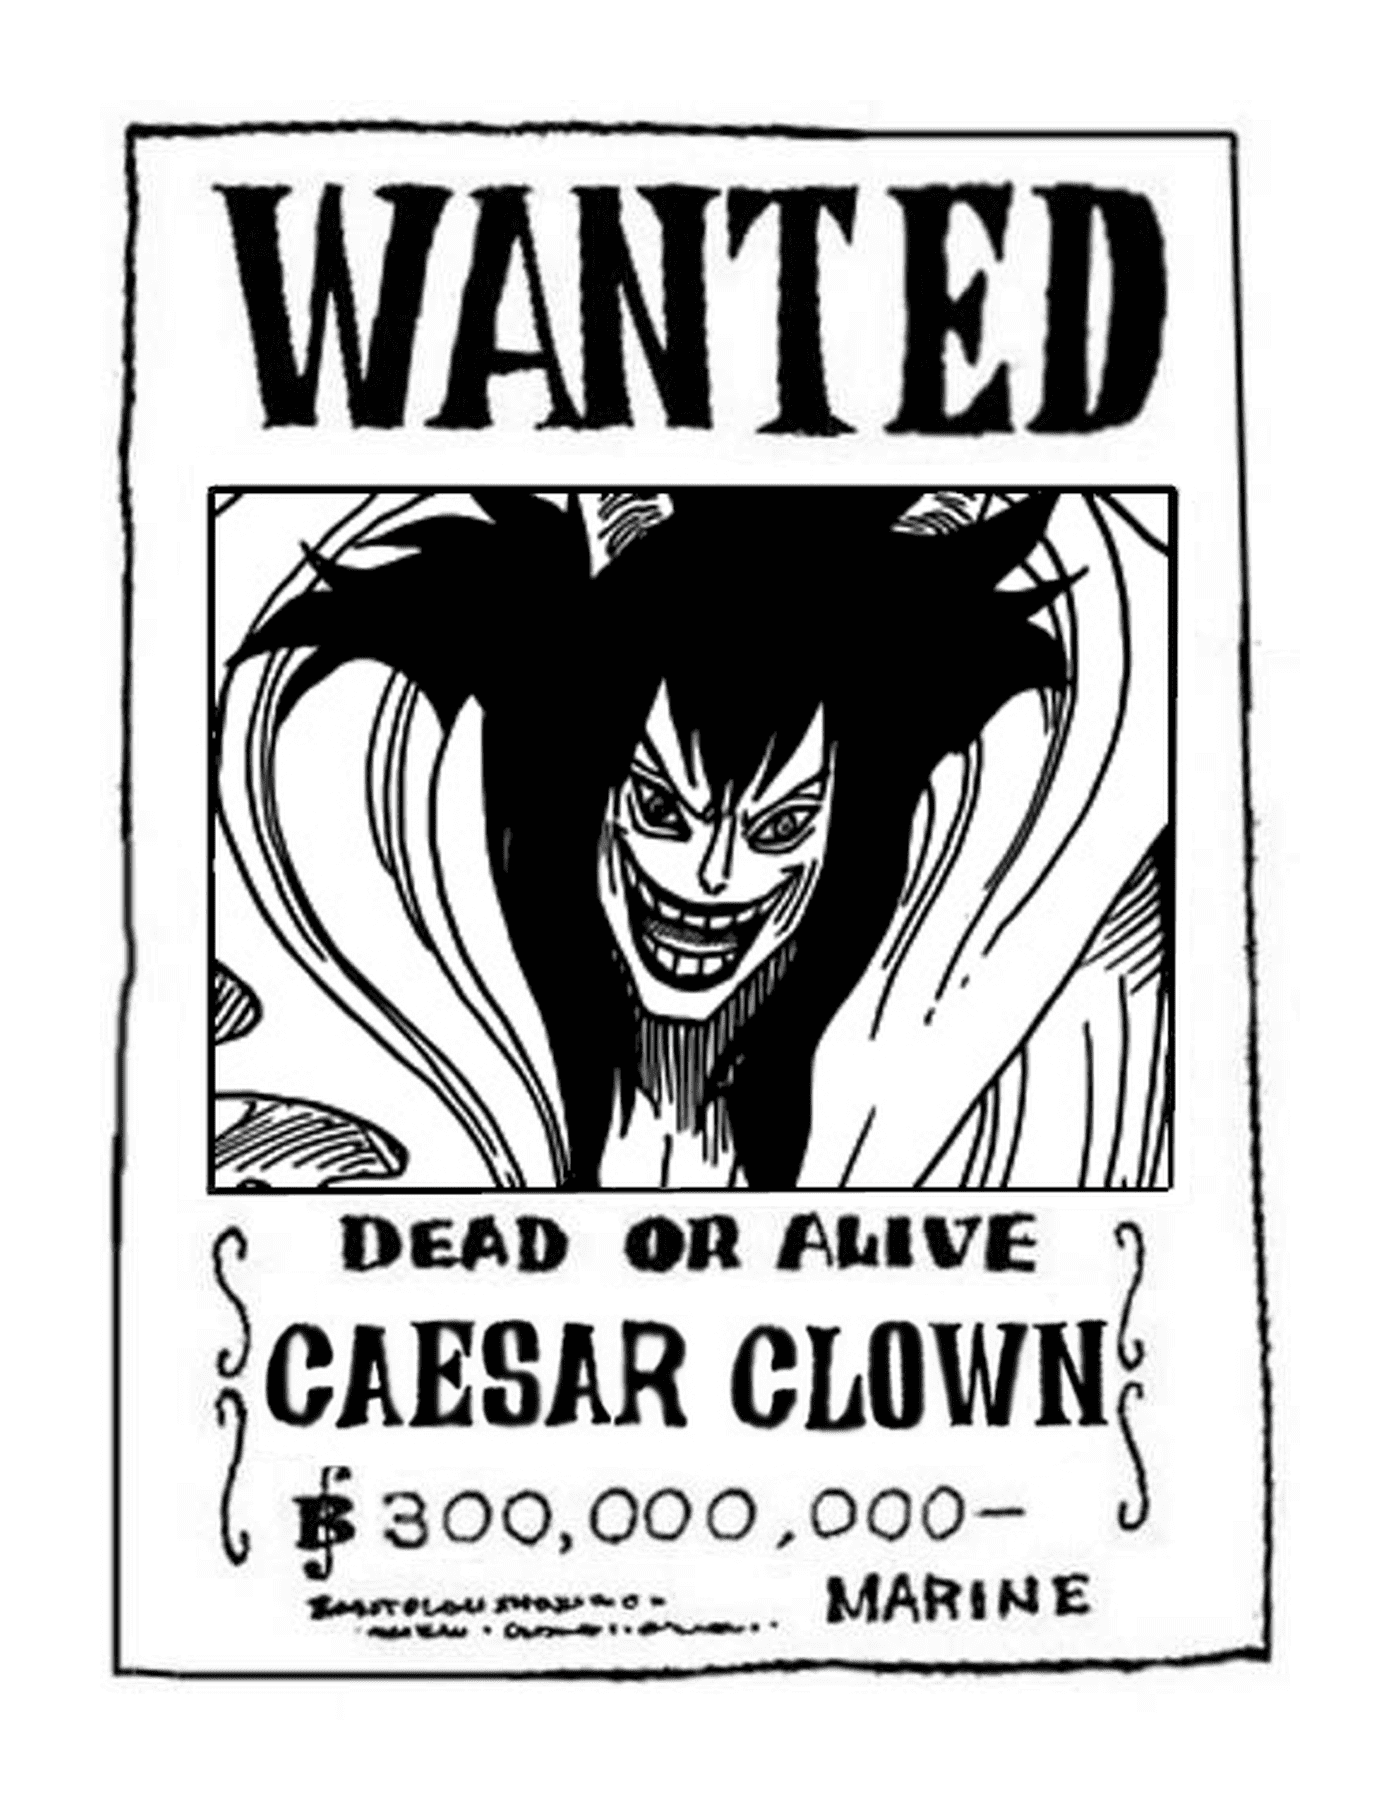  Wanted Caesar Clown, dead or alive 